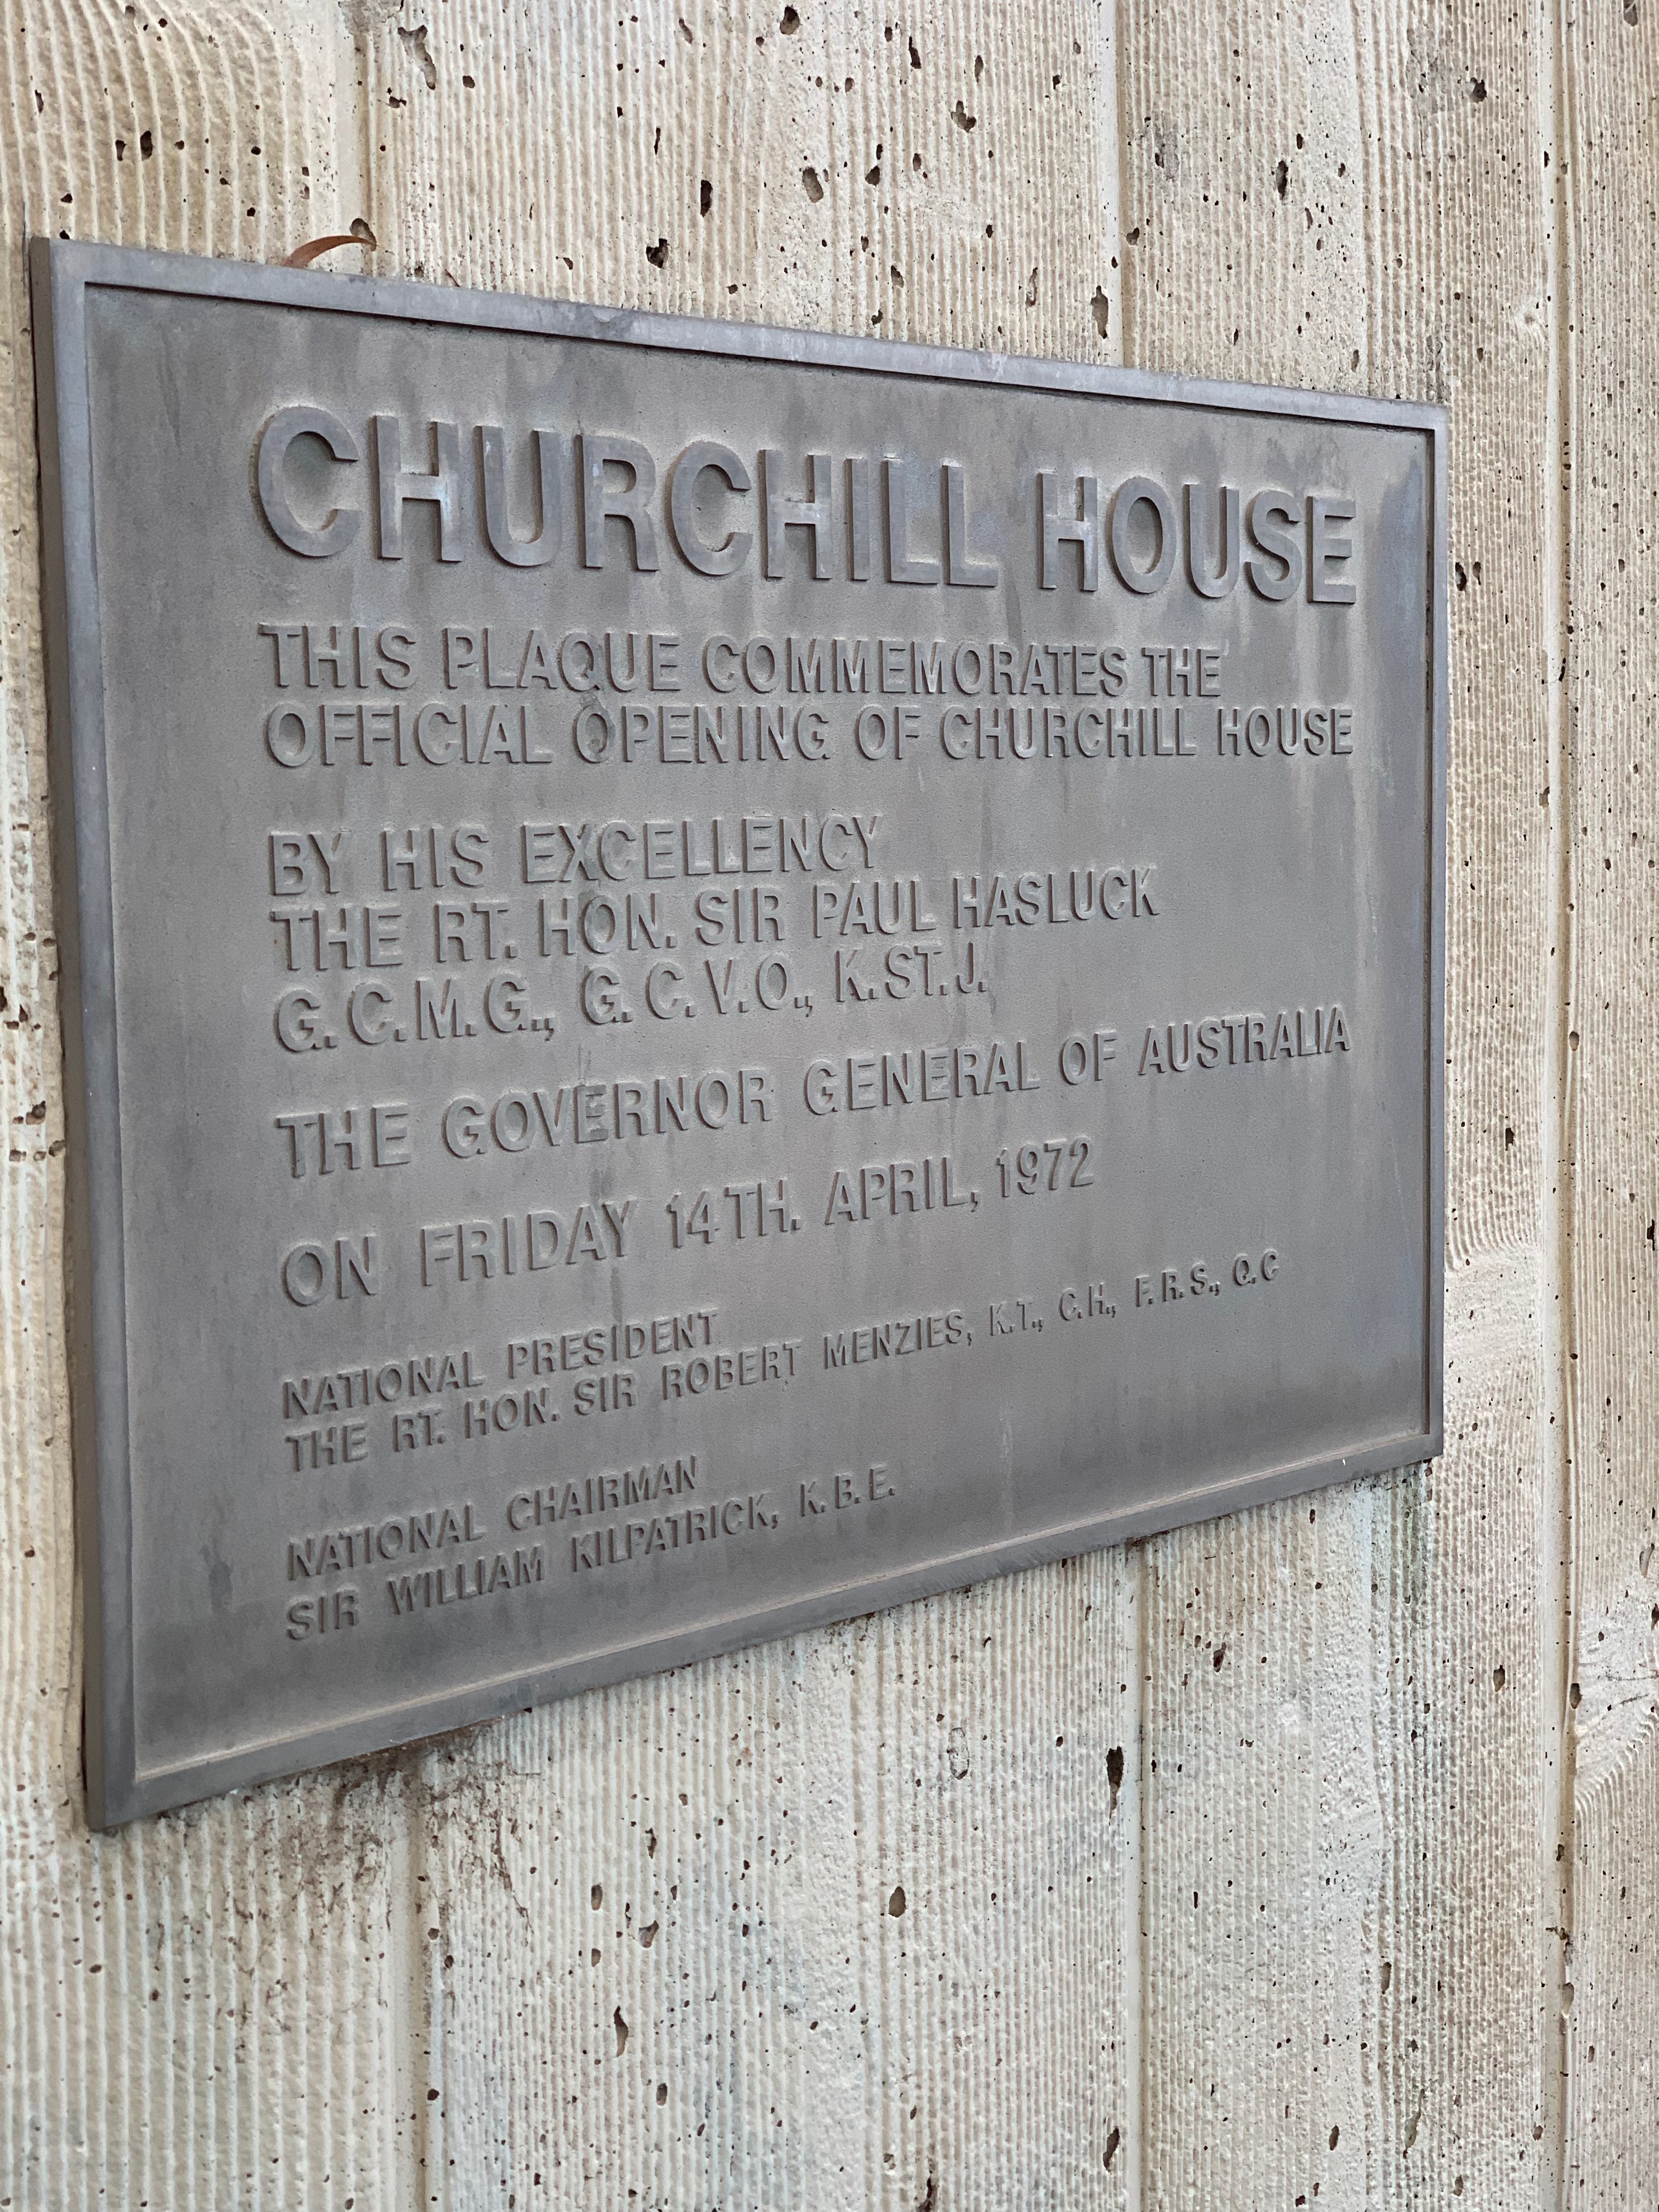 Image showing a plarque from the opening ceremony of churchill house